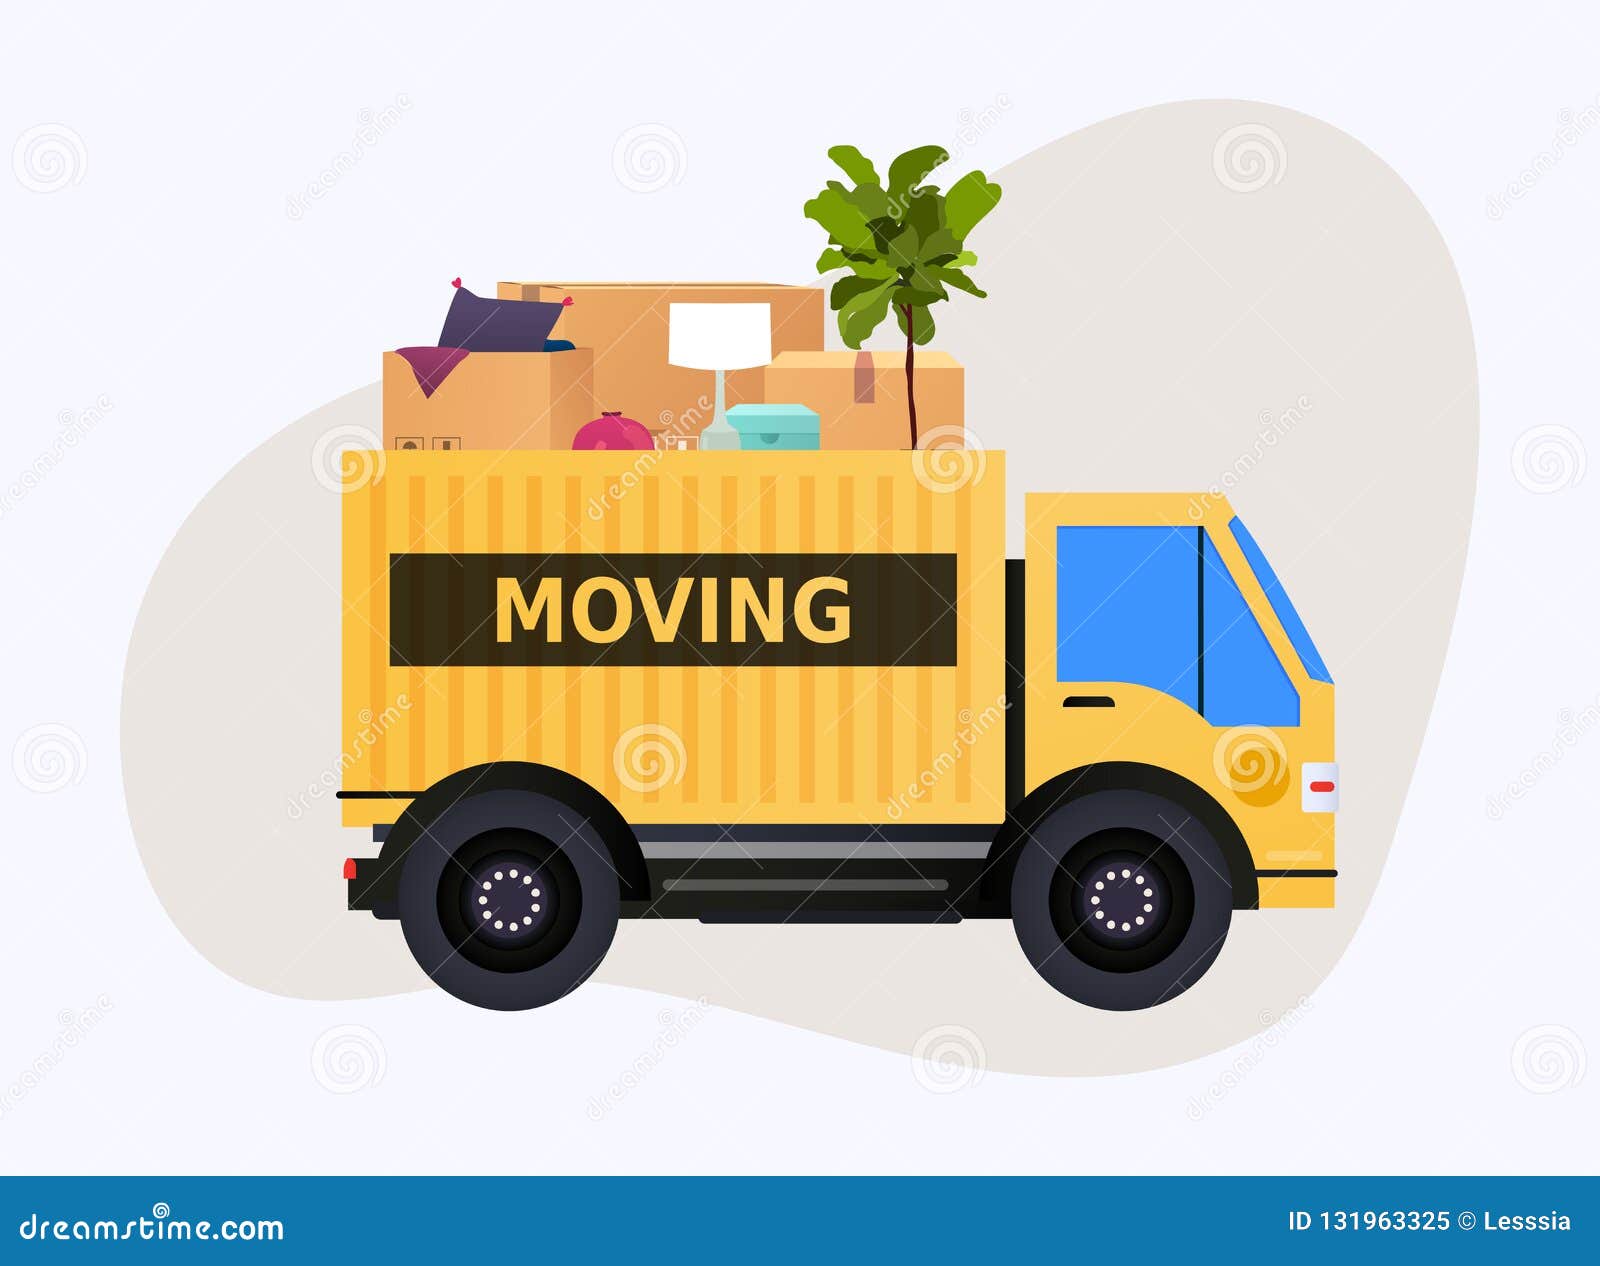 Moving Truck and Cardboard Boxes. Moving House. Transport Company